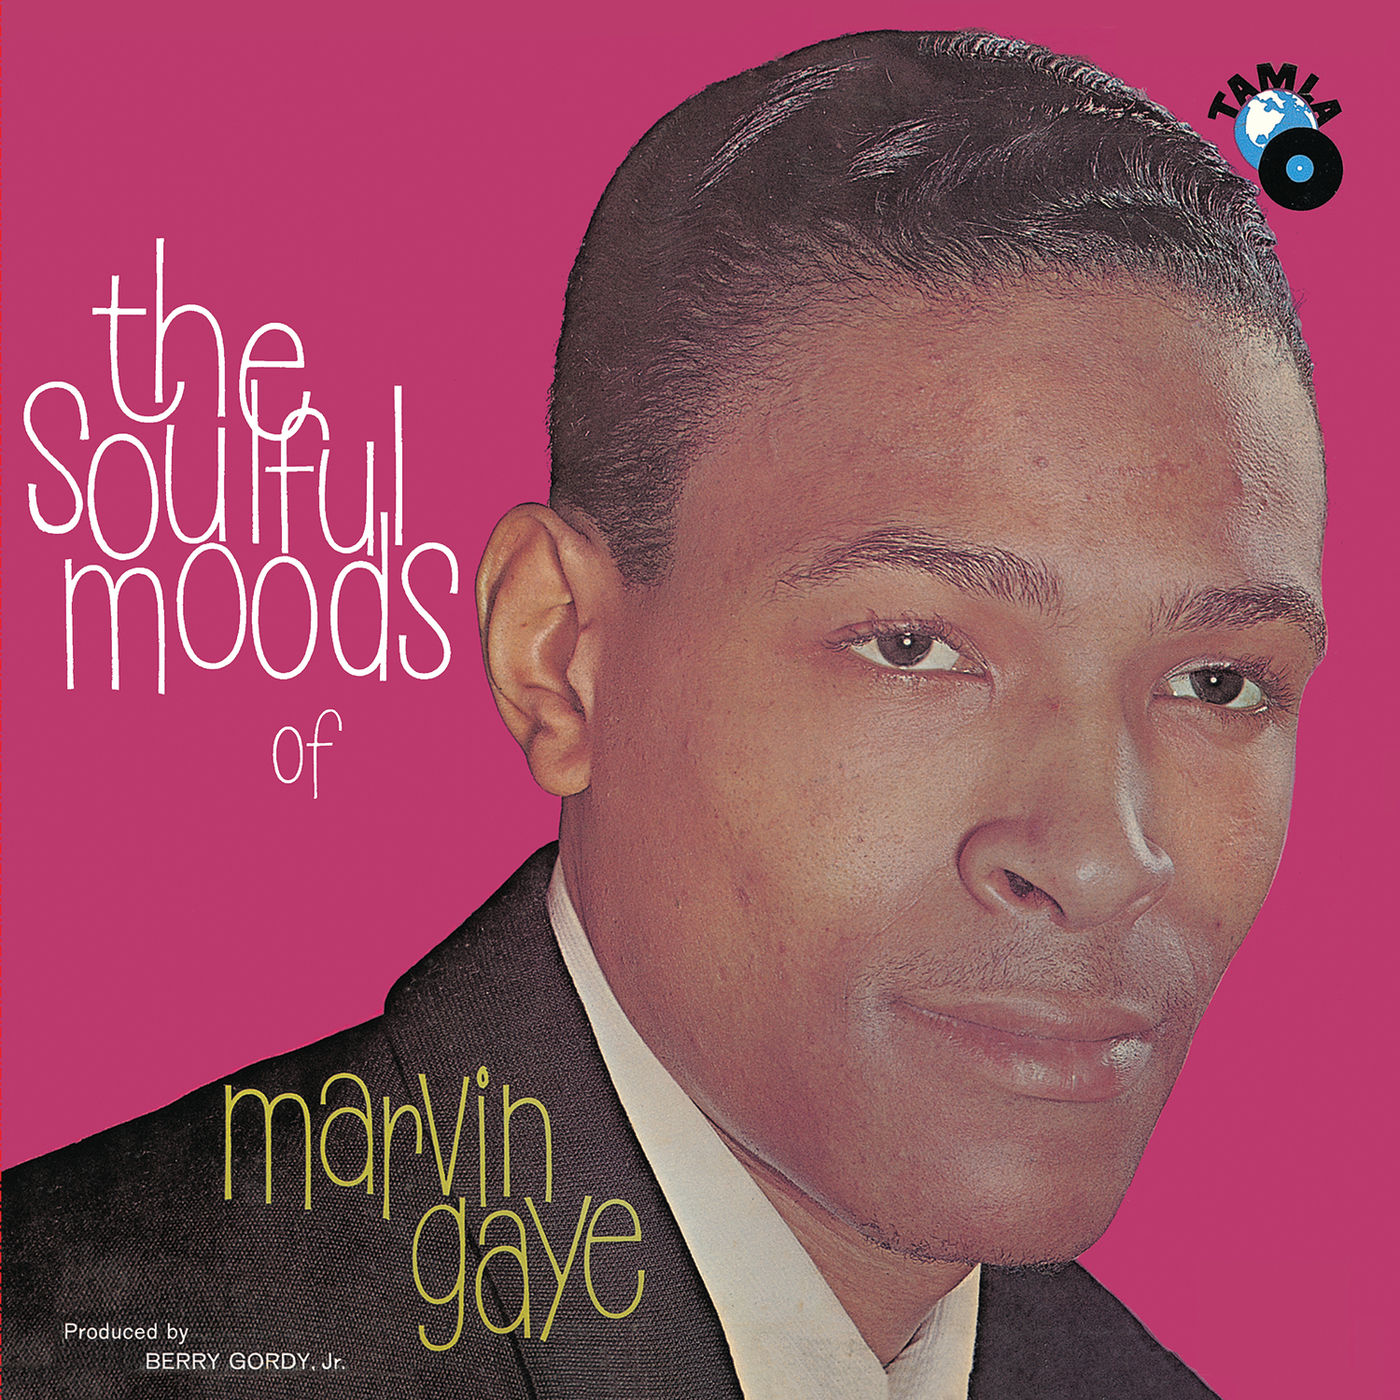 Marvin Gaye - The Soulful Moods Of Marvin Gaye (1961/2021) [FLAC 24bit/192kHz]